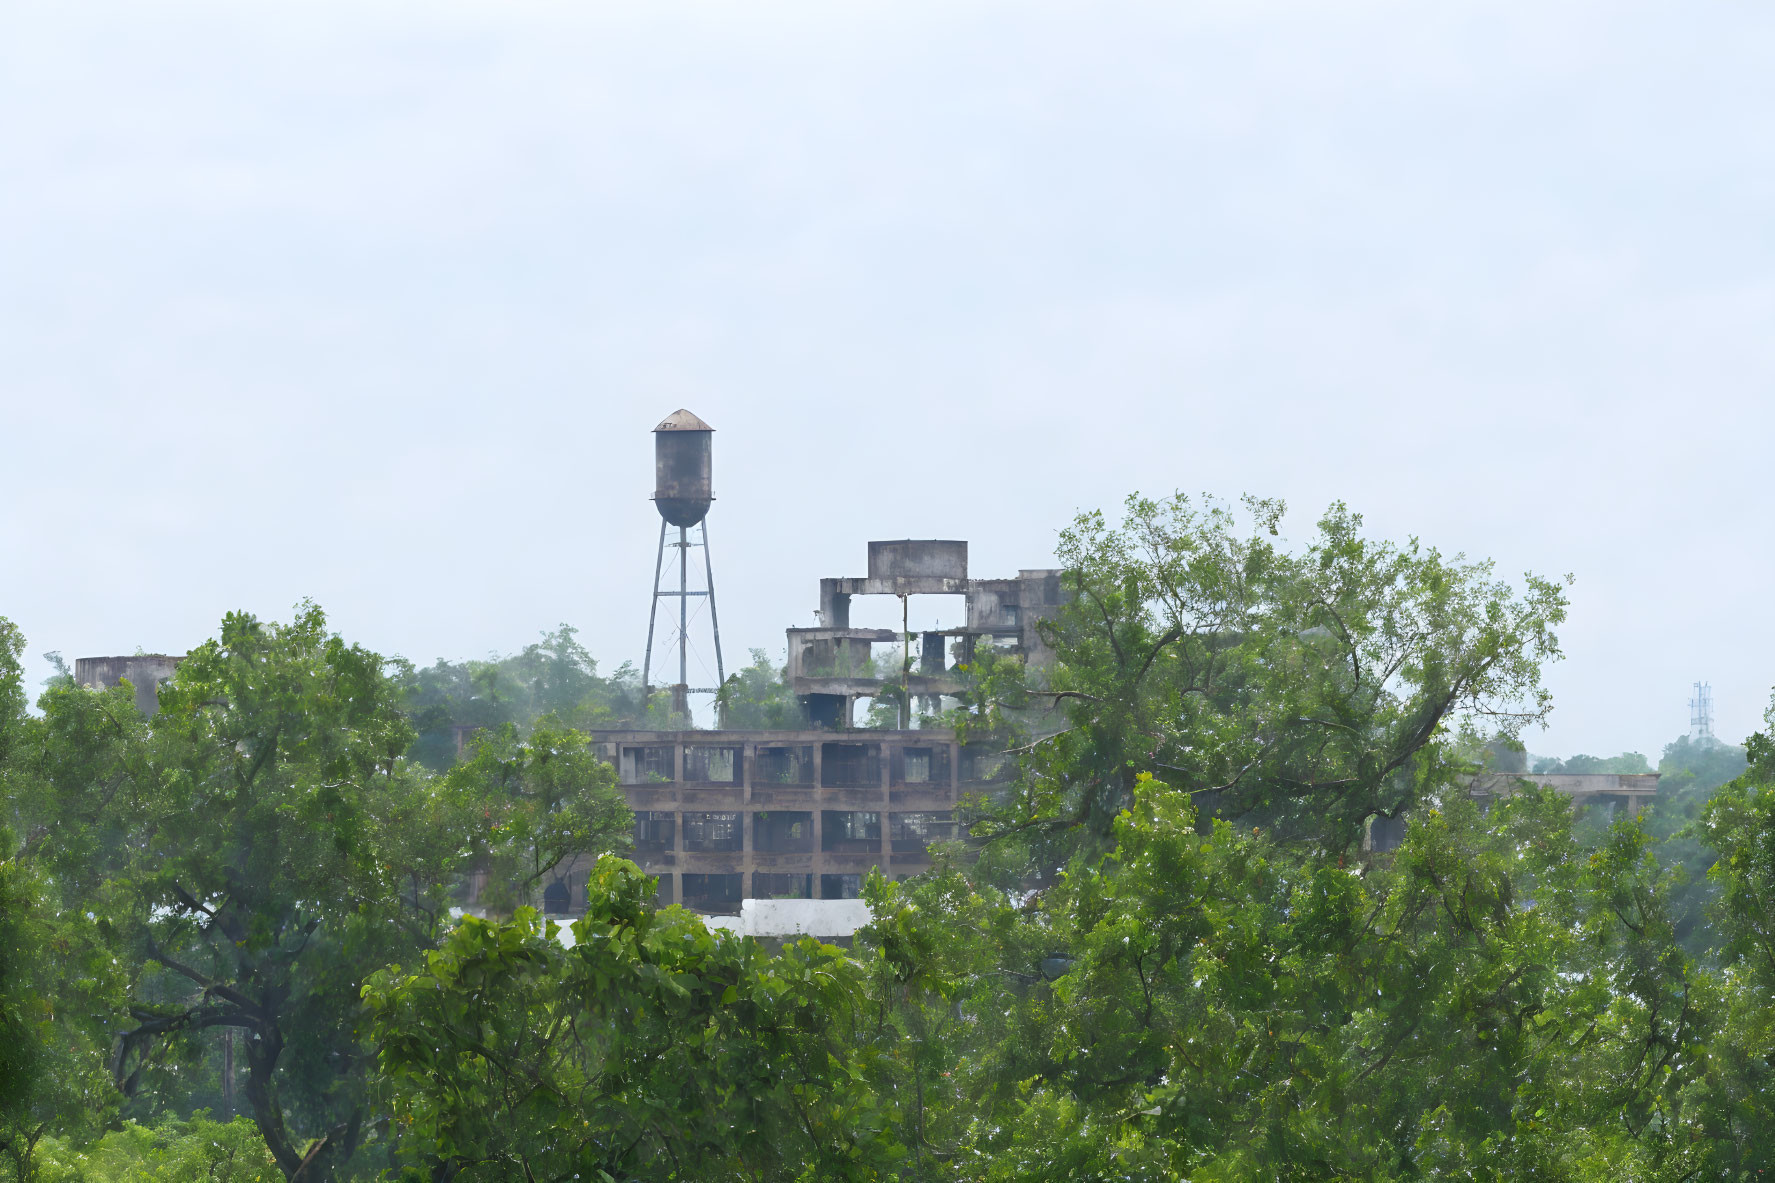 Dilapidated building with old water tower and green foliage